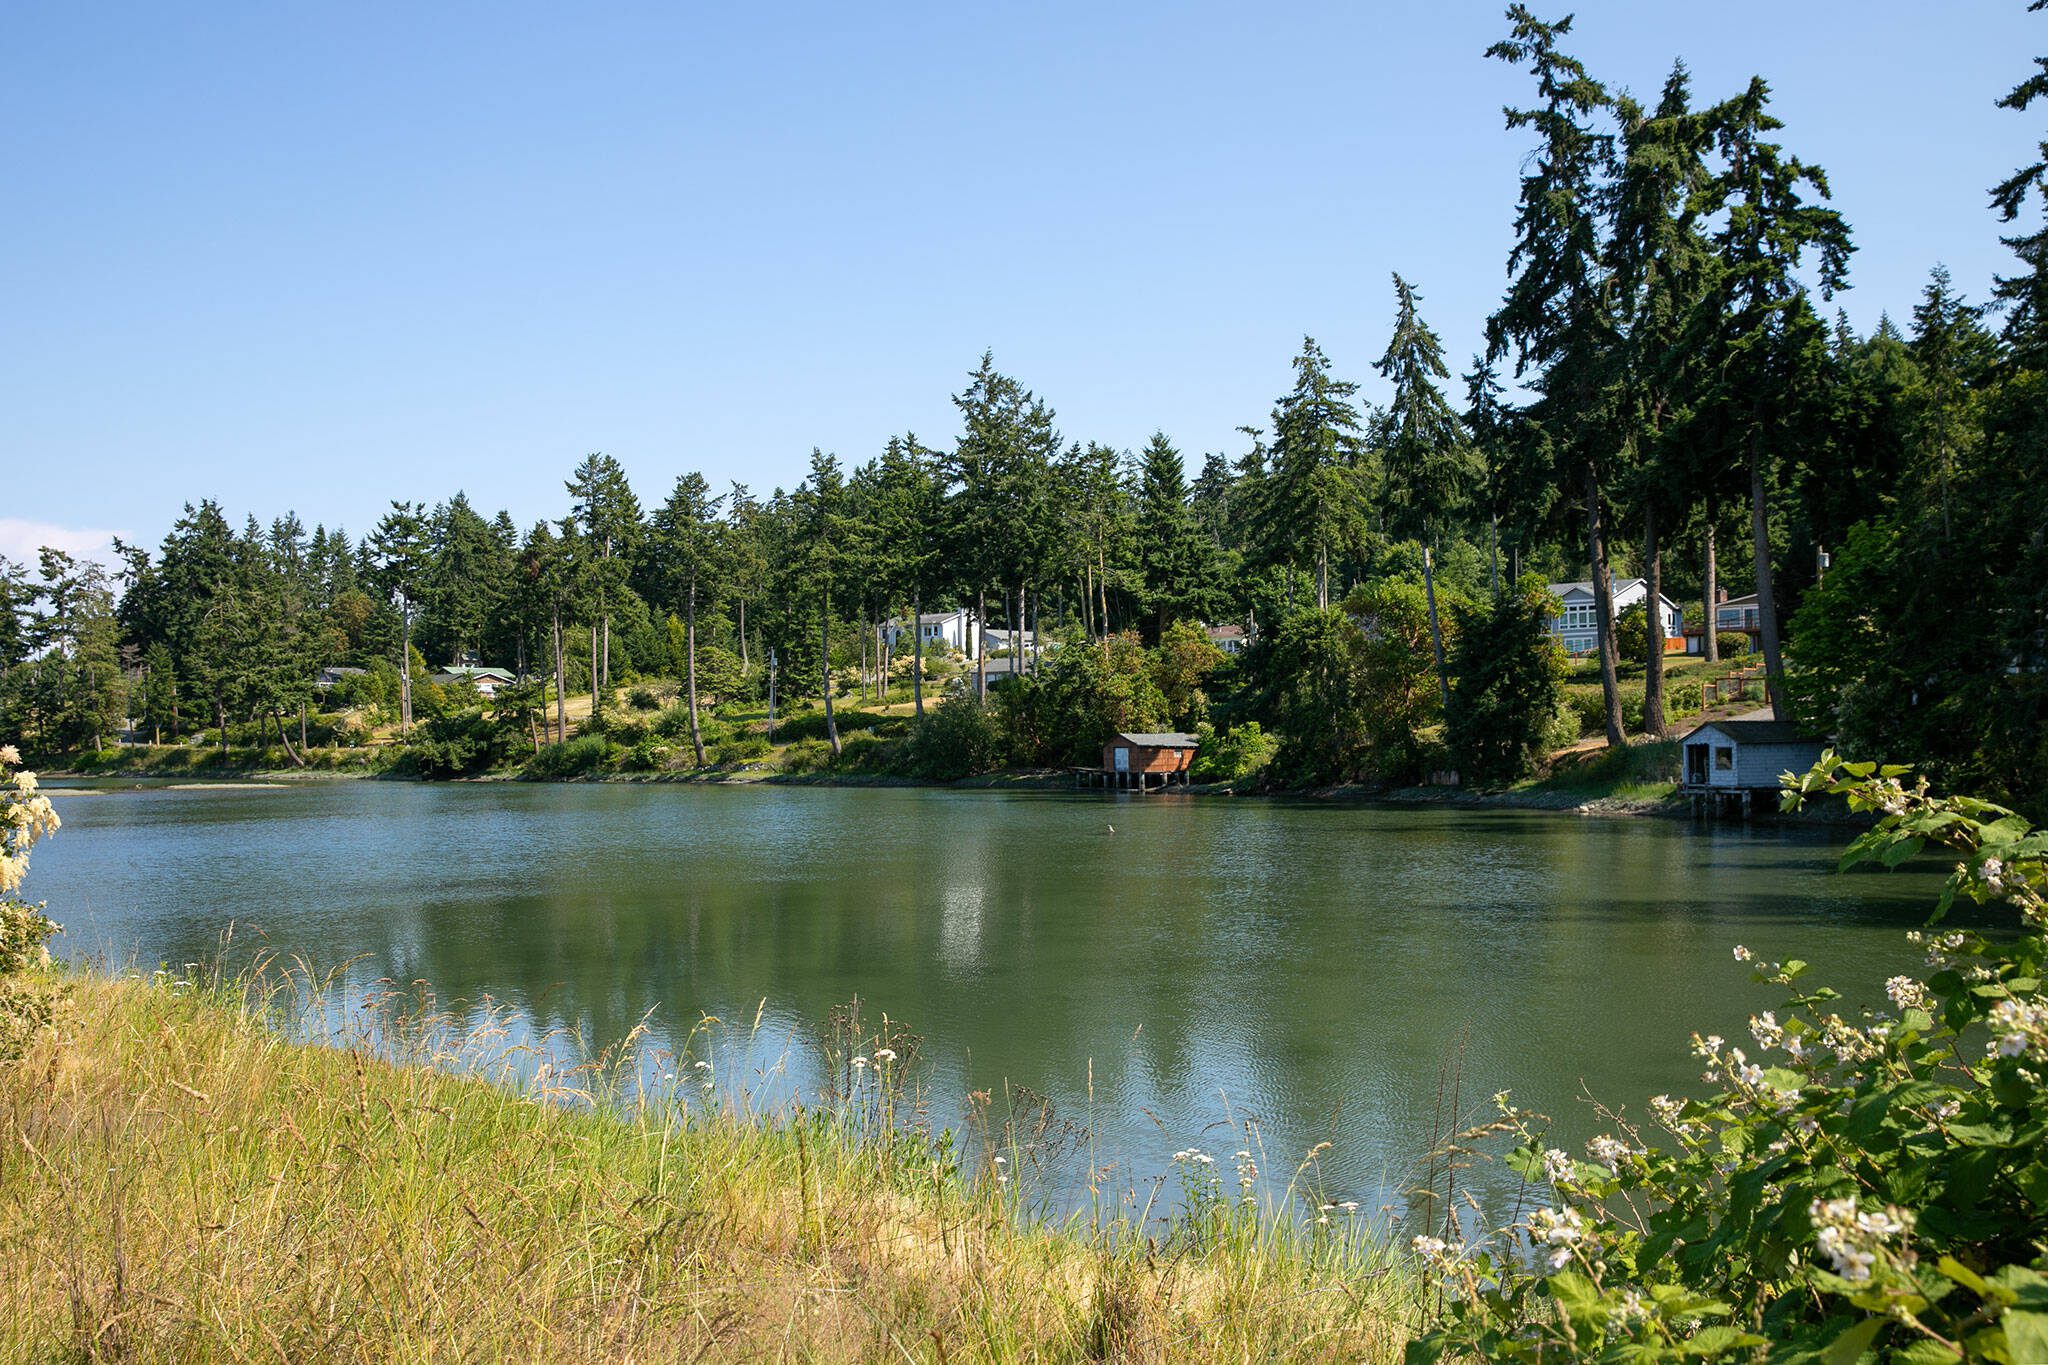 Houses are nestled on the hillside above Harrington Lagoon, downhill from a water well that for over a year has tested positive for PFAS on Thursday, June 22, 2023, in Coupeville, Washington. (Ryan Berry / The Herald)